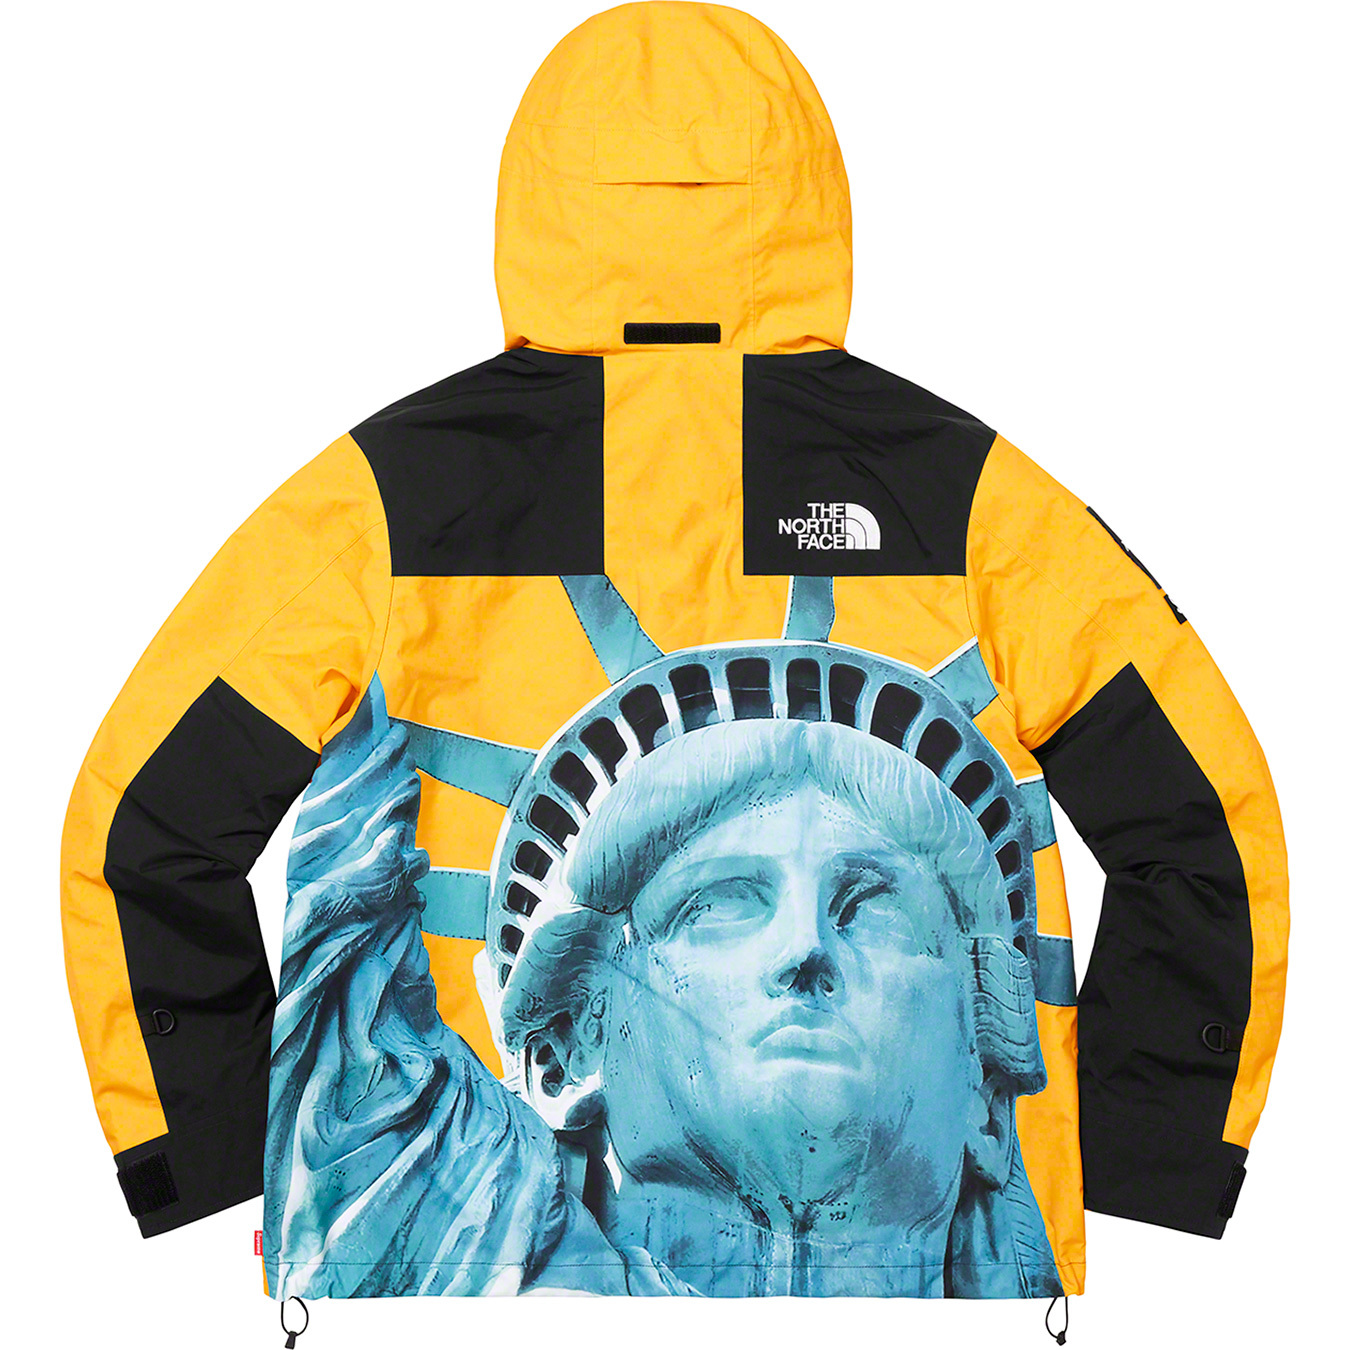 Supreme TNF North Face Mountain Jacket Statue of Liberty FW19 Black XL